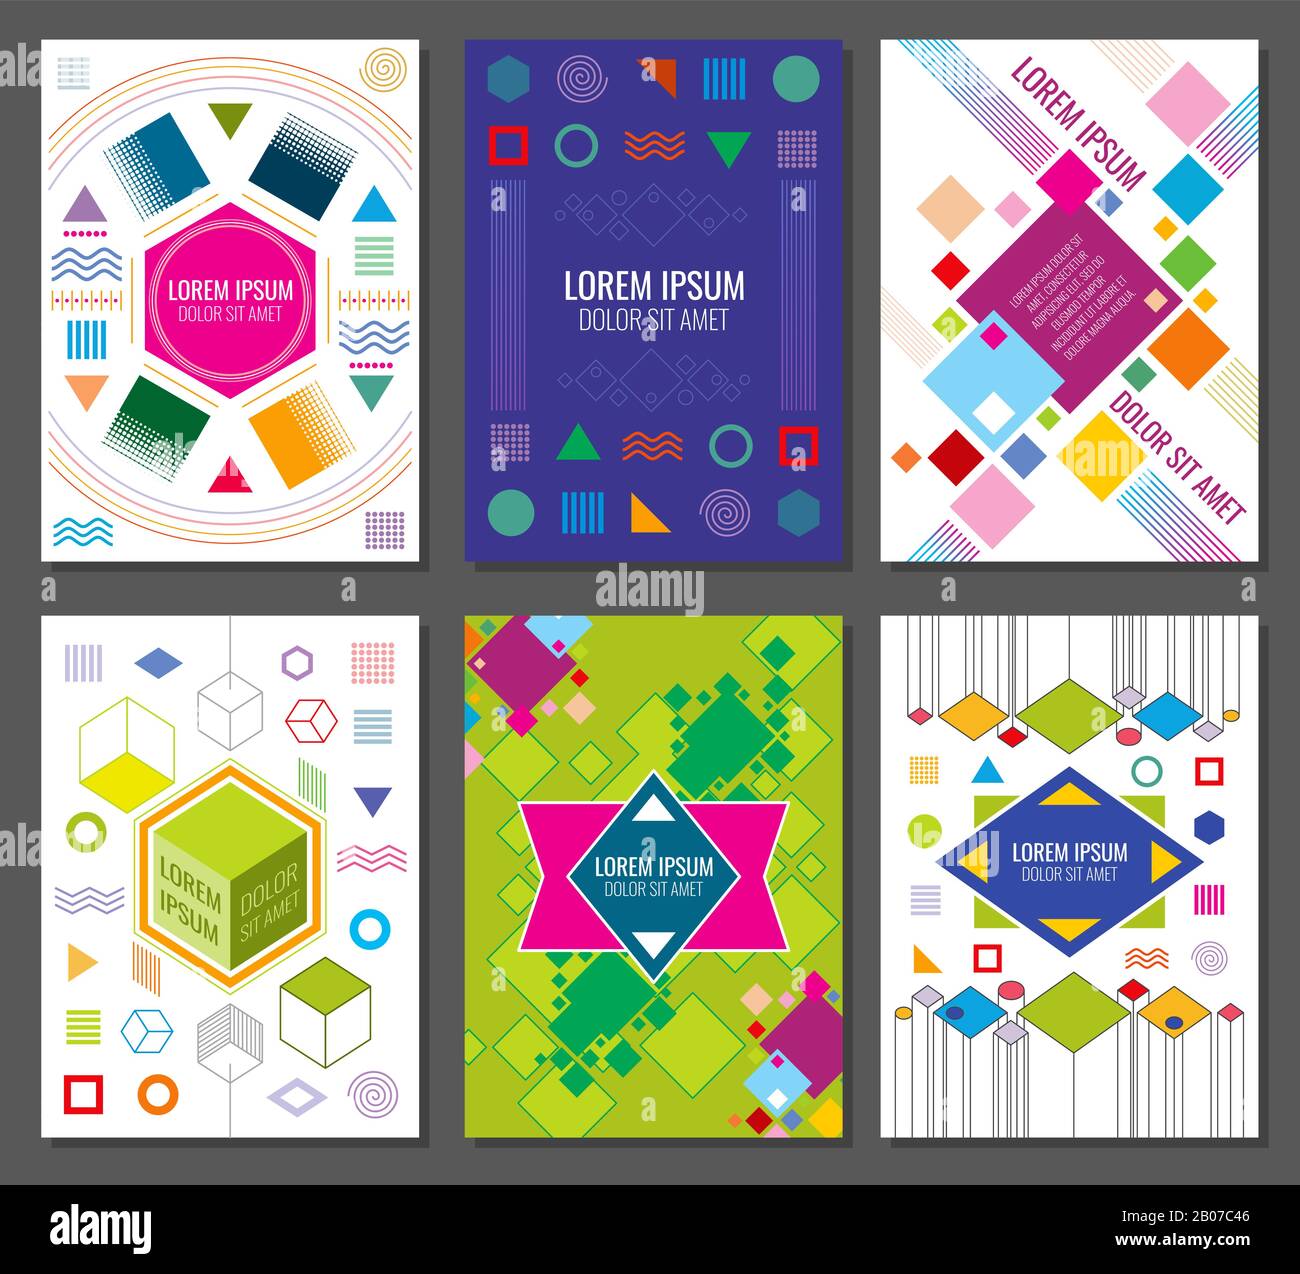 Abstract geometric vector banners, posters, flyers set in bauhaus design style. Hipster colored chaotic style illustration Stock Vector